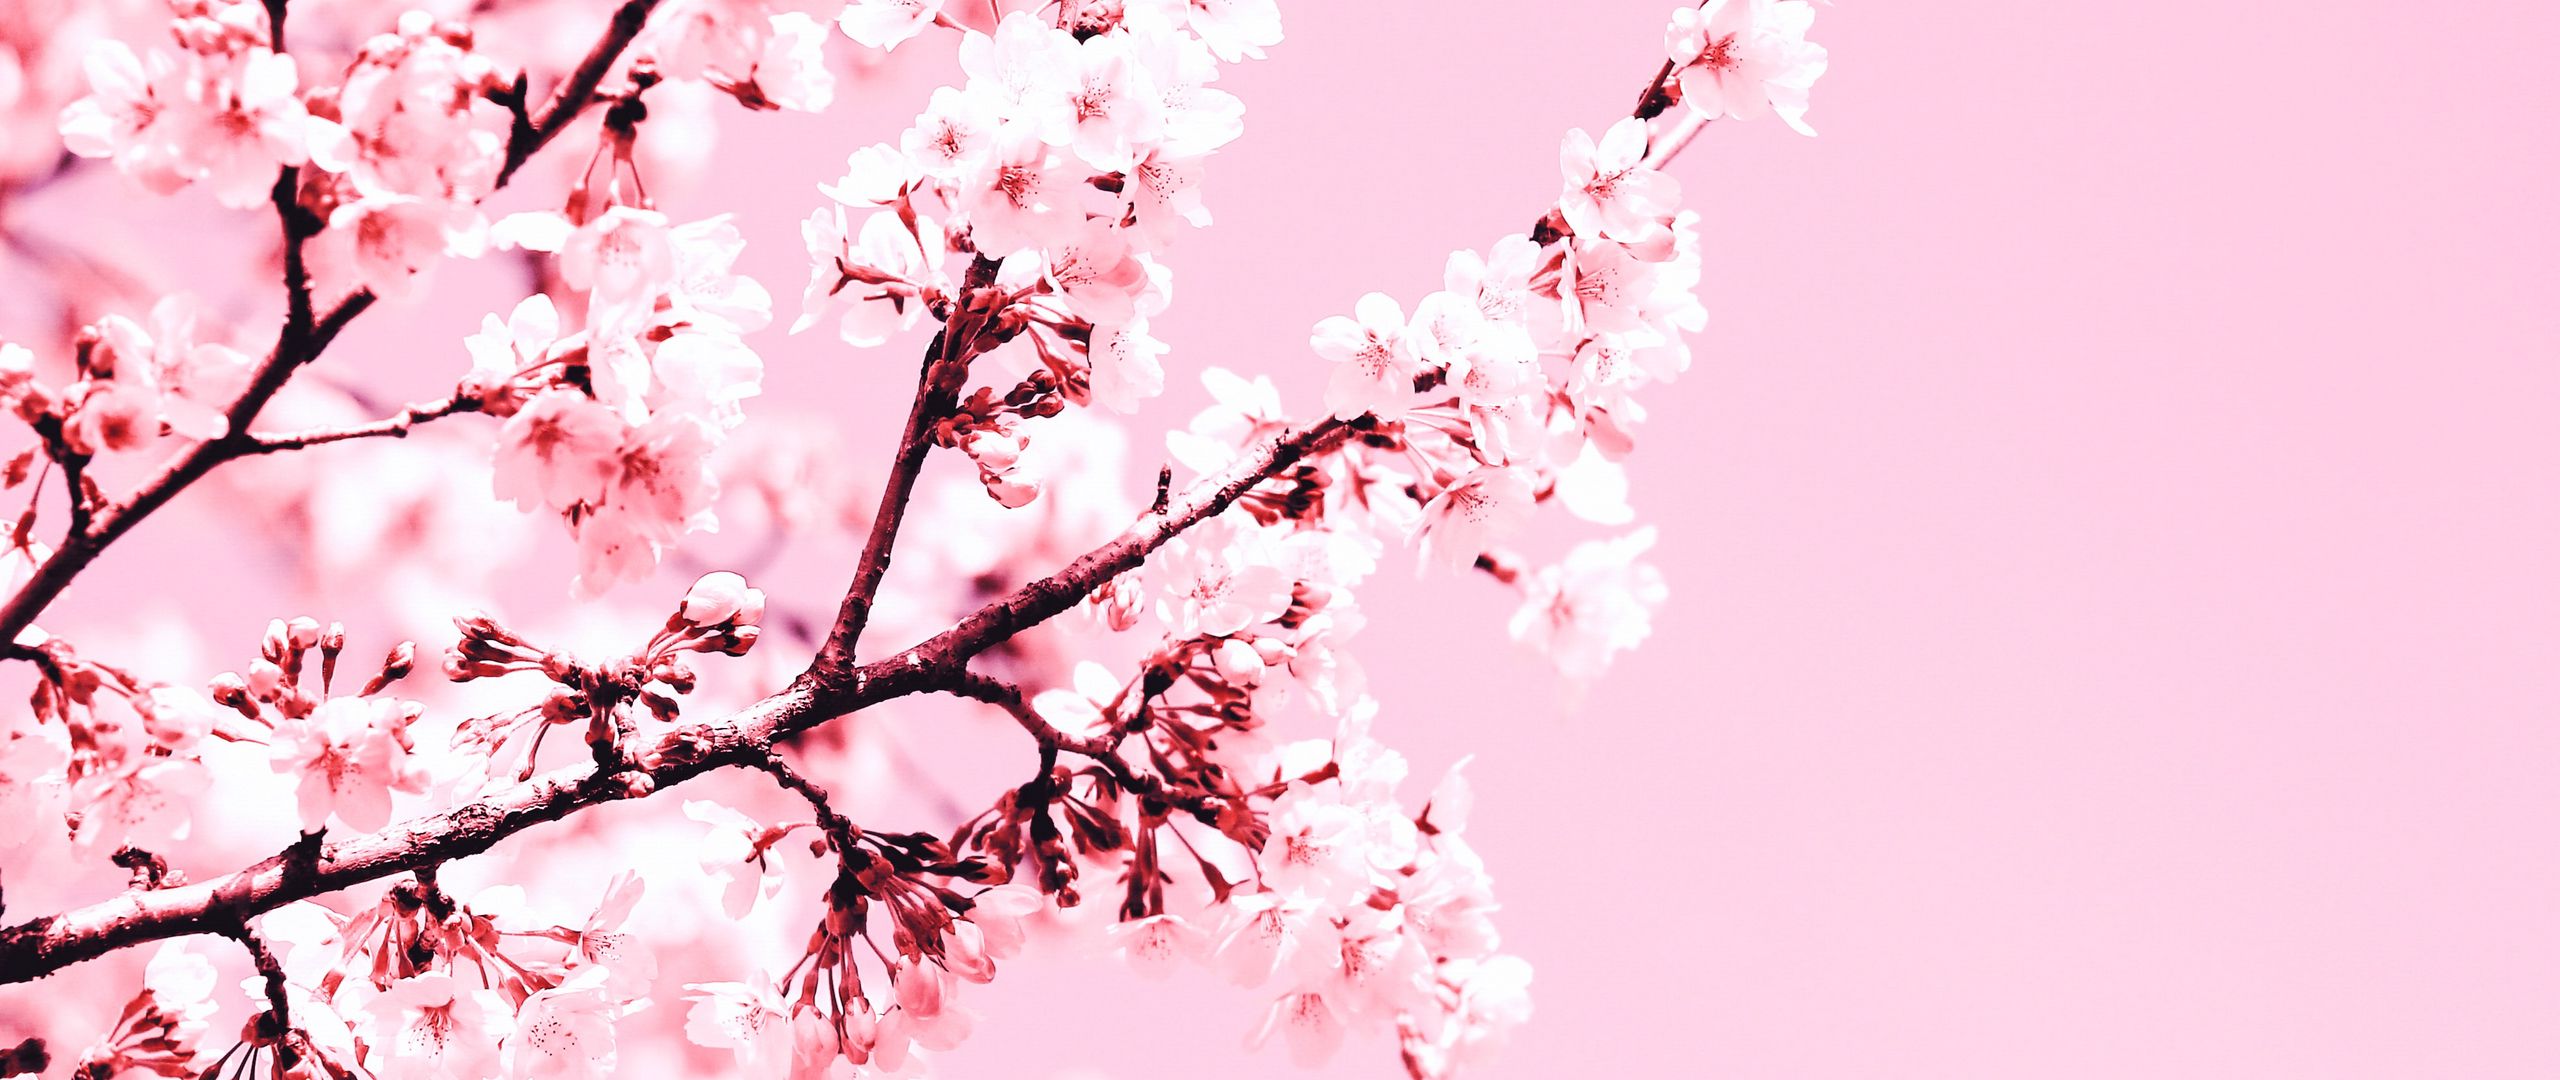 Download wallpaper 2560x1080 cherry blossom, flowers, branch, pink, plant,  bloom dual wide 1080p hd background